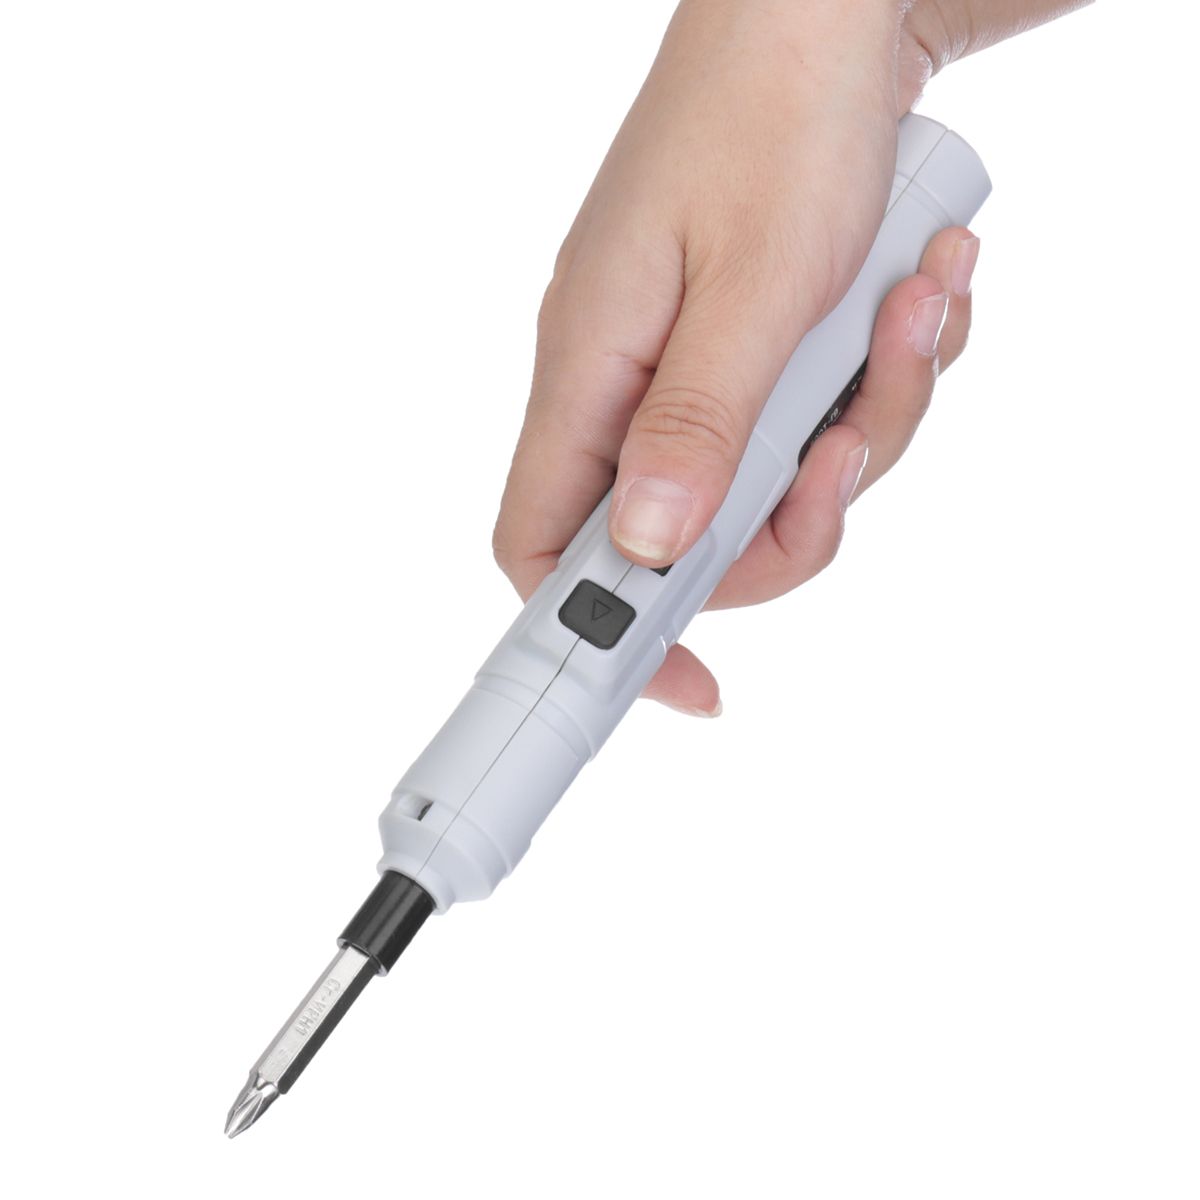 DC36V-Mini-Lithium-Cordless-Electric-Screwdriver-Power-Screw-Driver-DIY-Tool-With-USB-Charger-1582416